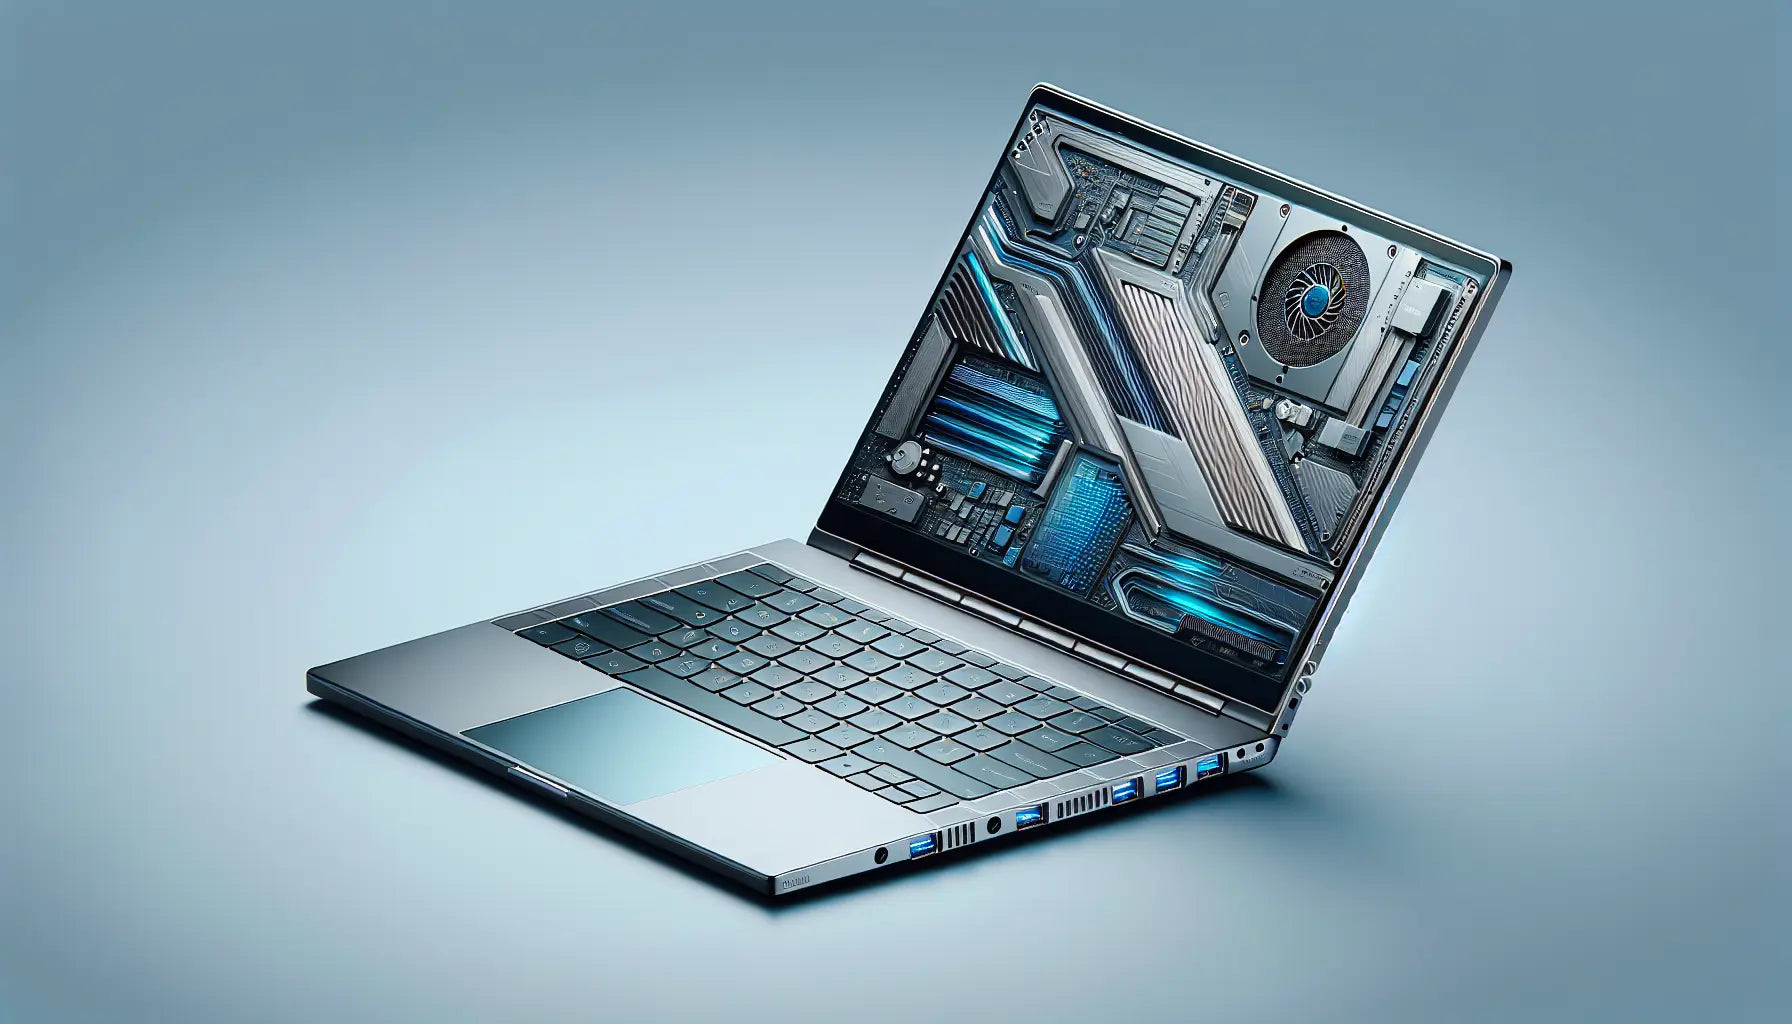 Discover the Power of the HP EliteBook 830 G5 I5, 8th Gen, 256SSD, 16GB Ram Laptop